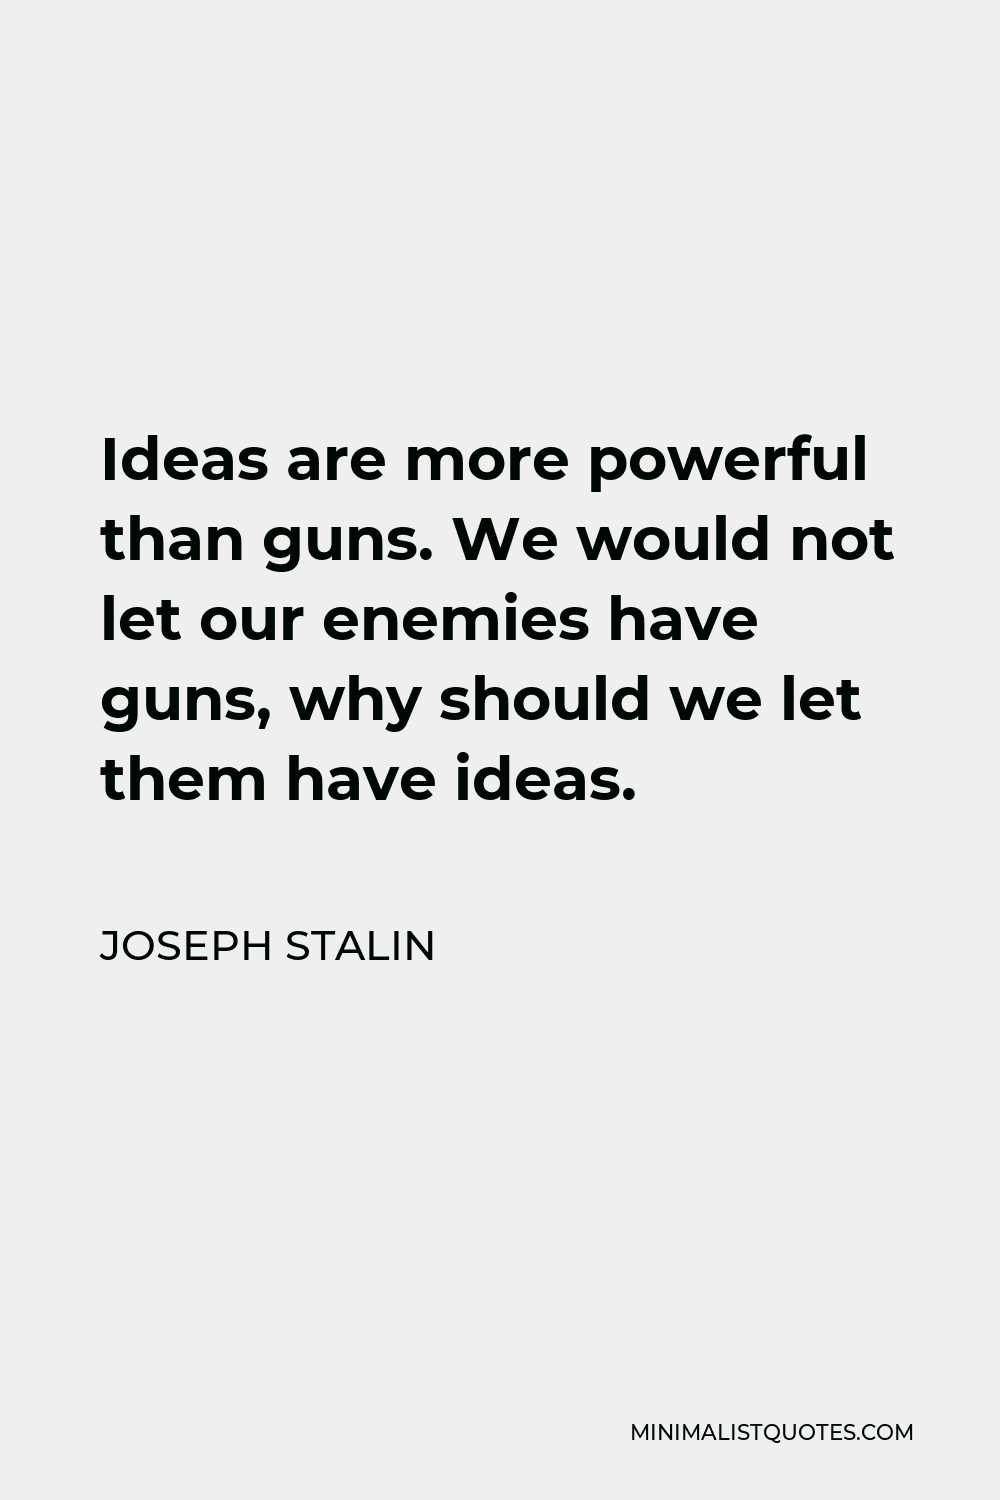 Joseph Stalin Quote - Ideas are more powerful than guns. We would not let our enemies have guns, why should we let them have ideas.